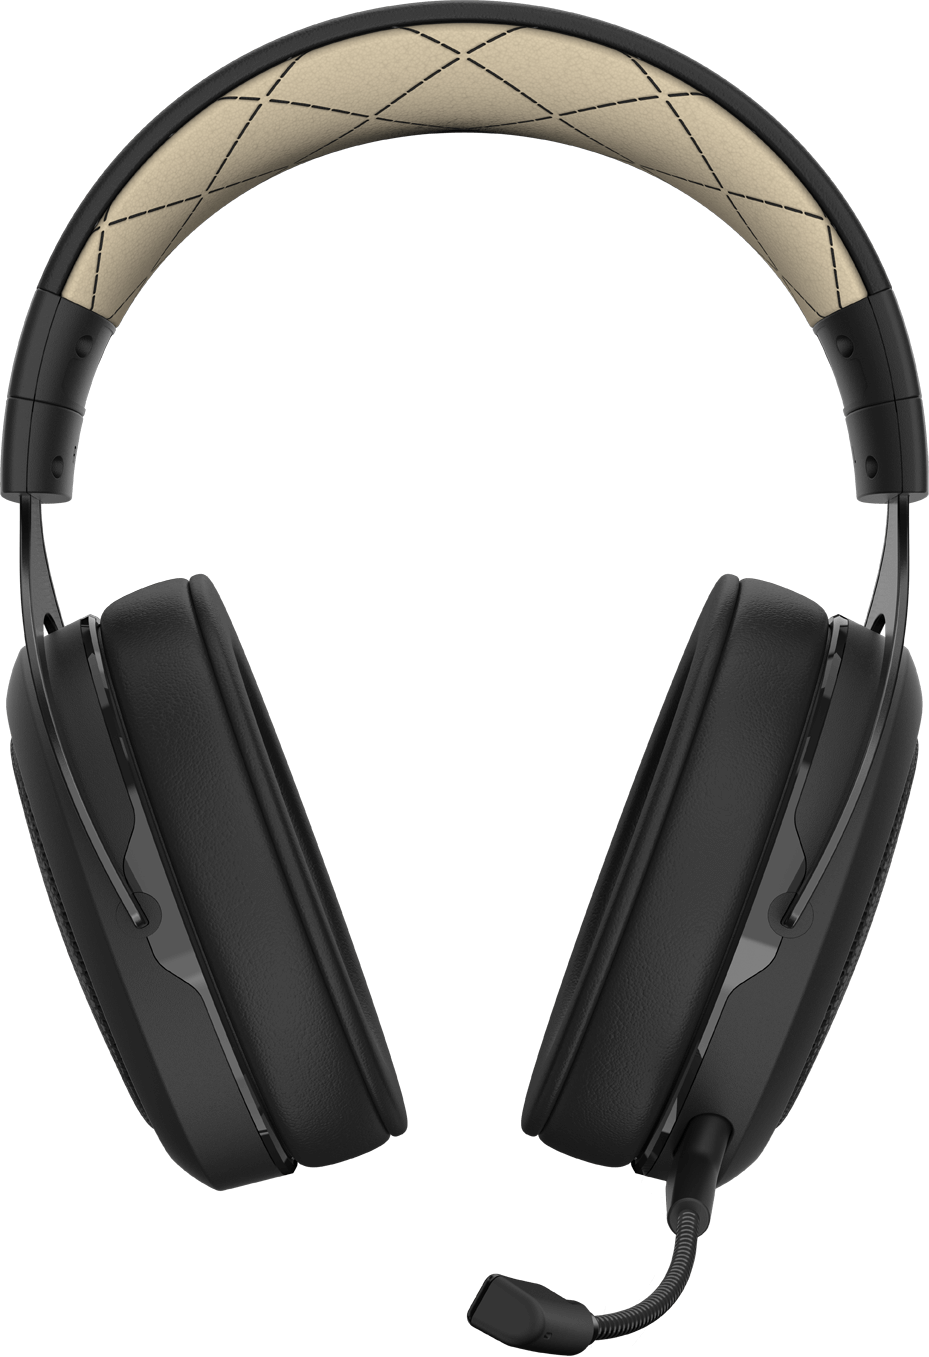 HS70 PRO GAMING HEADSET - CRAFTED FOR COMFORT